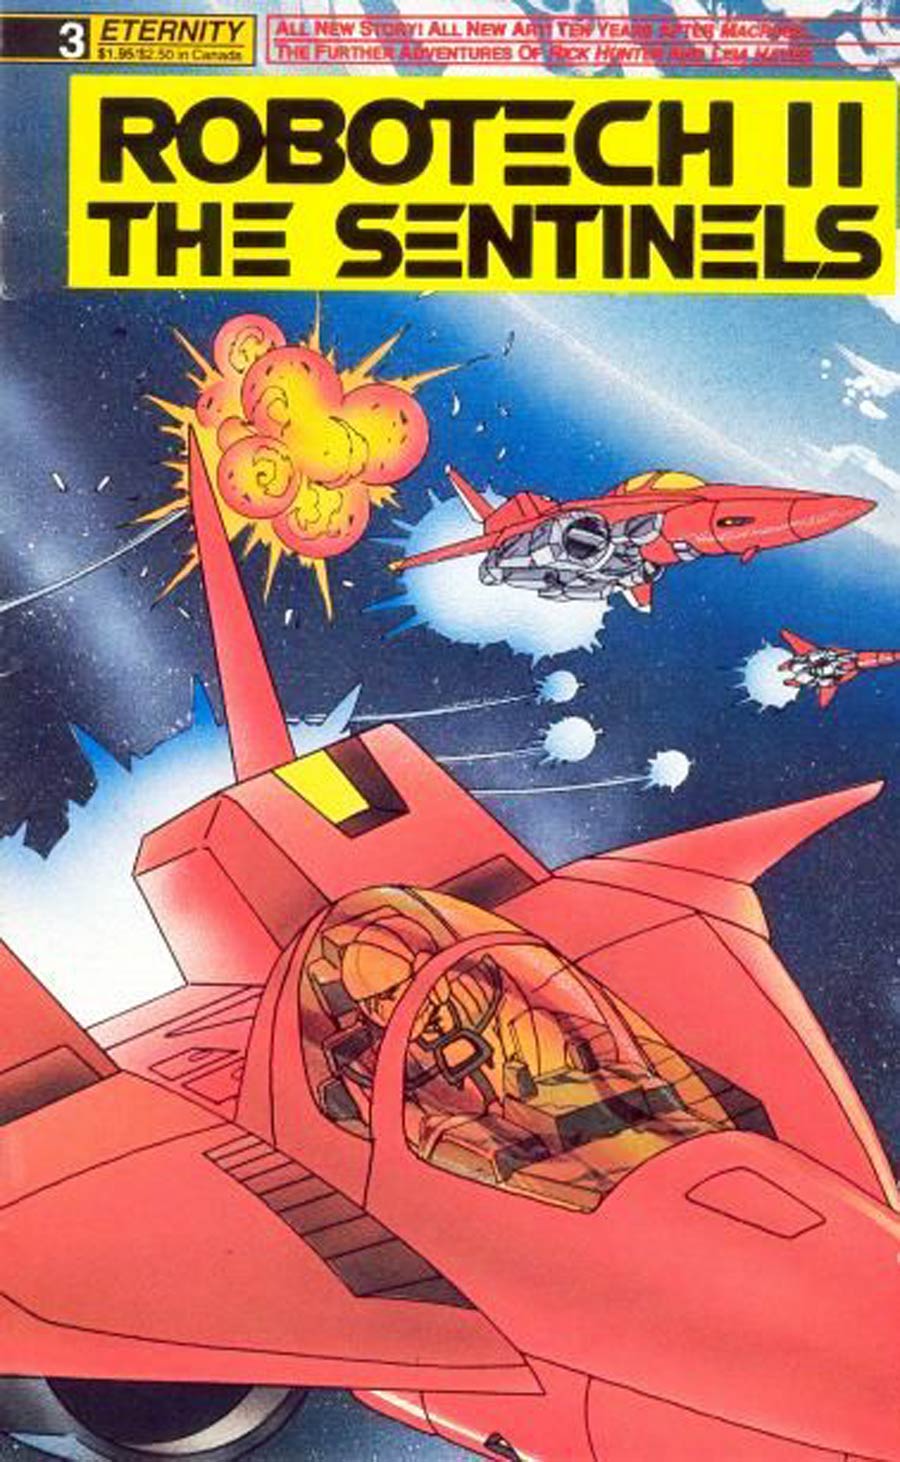 Robotech II The Sentinels Book 1 #3 Cover B 2nd Ptg